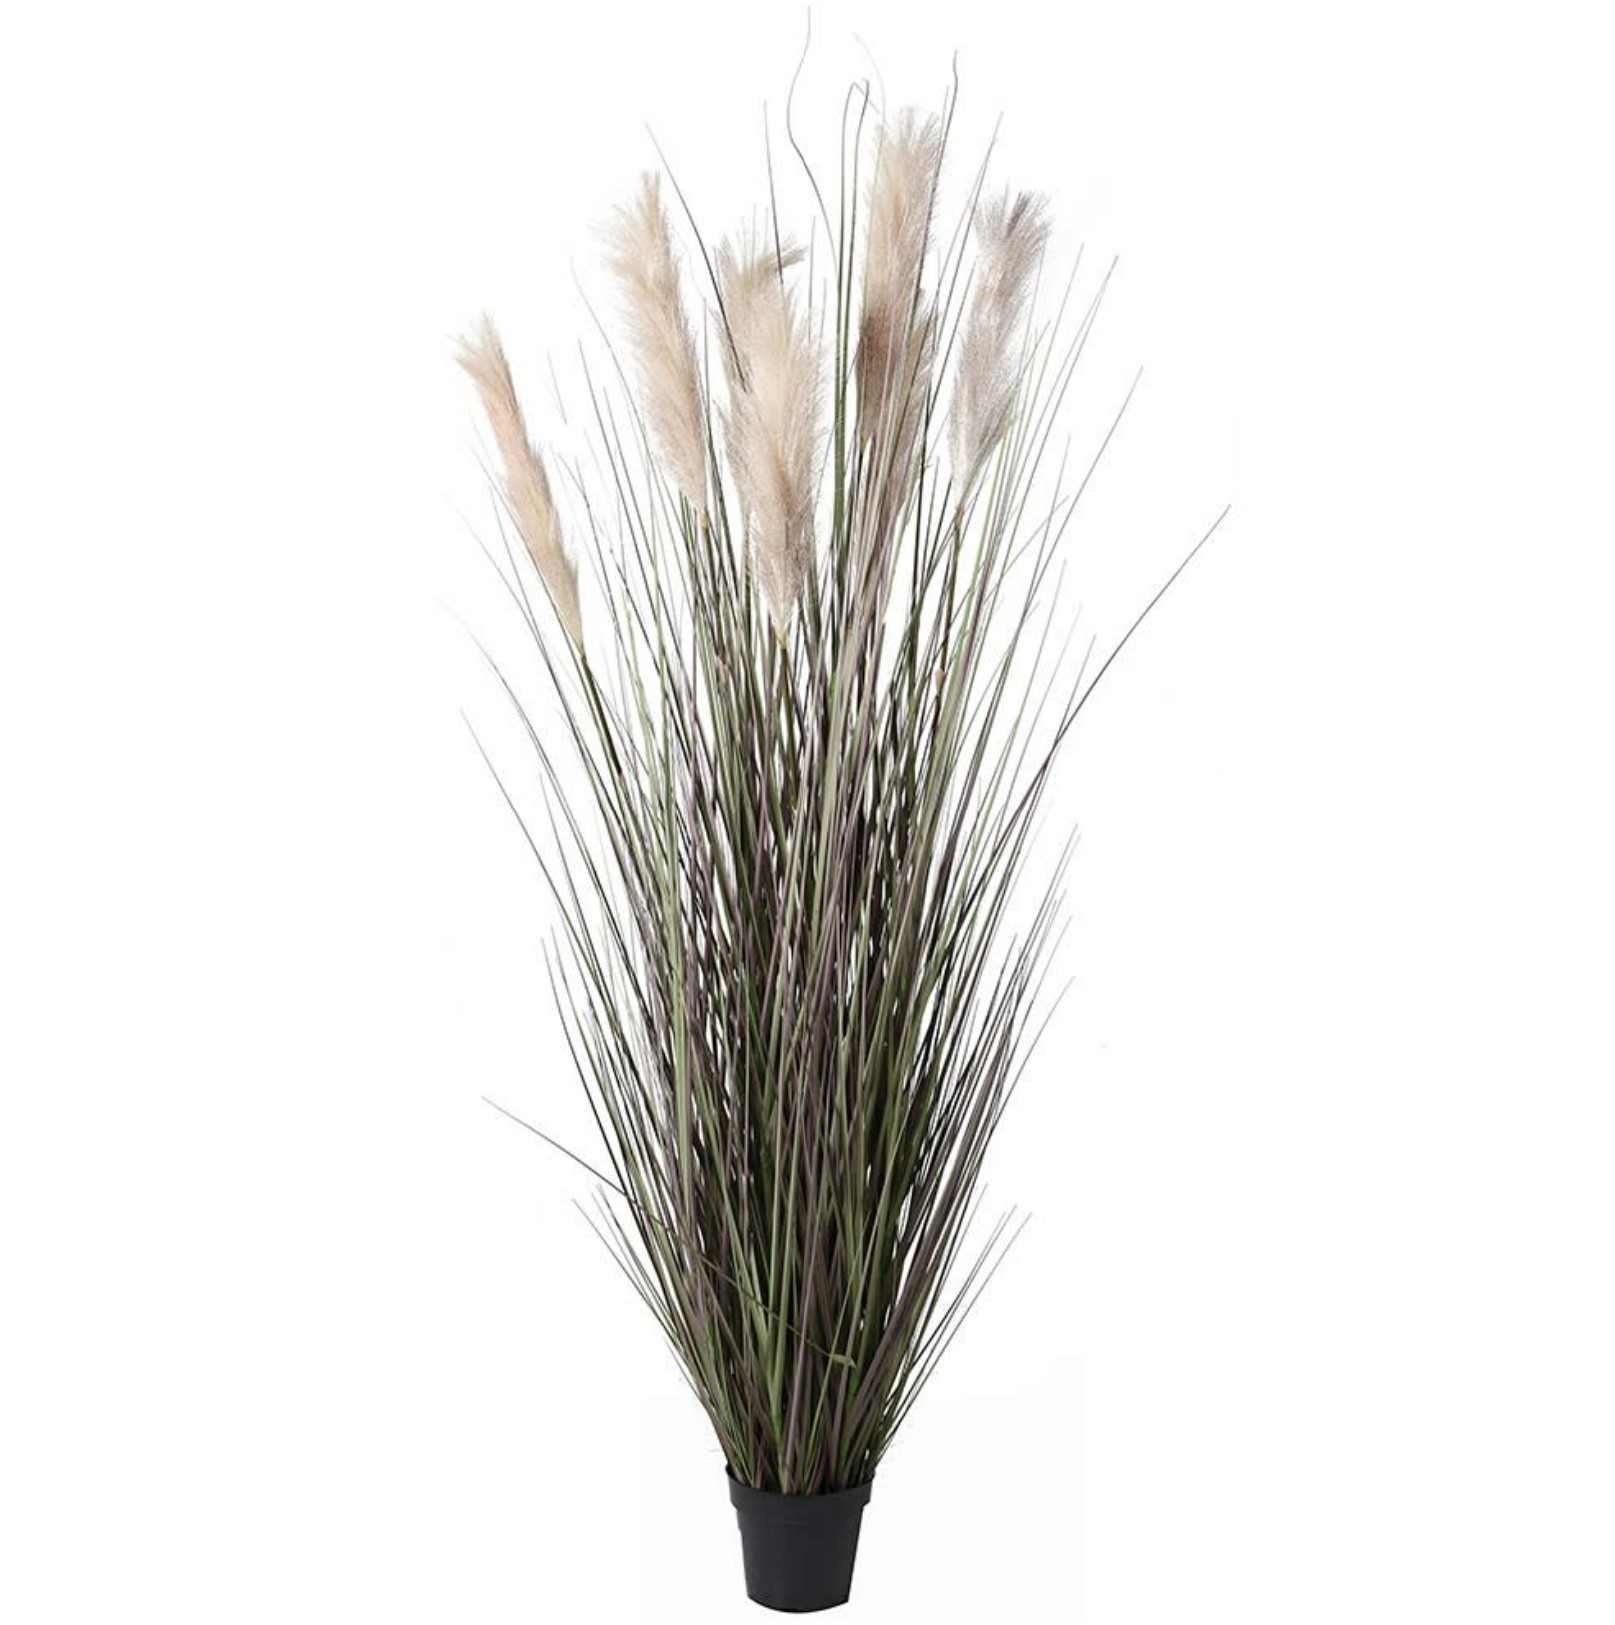 Onion Grass with Wheat Plant - Tall